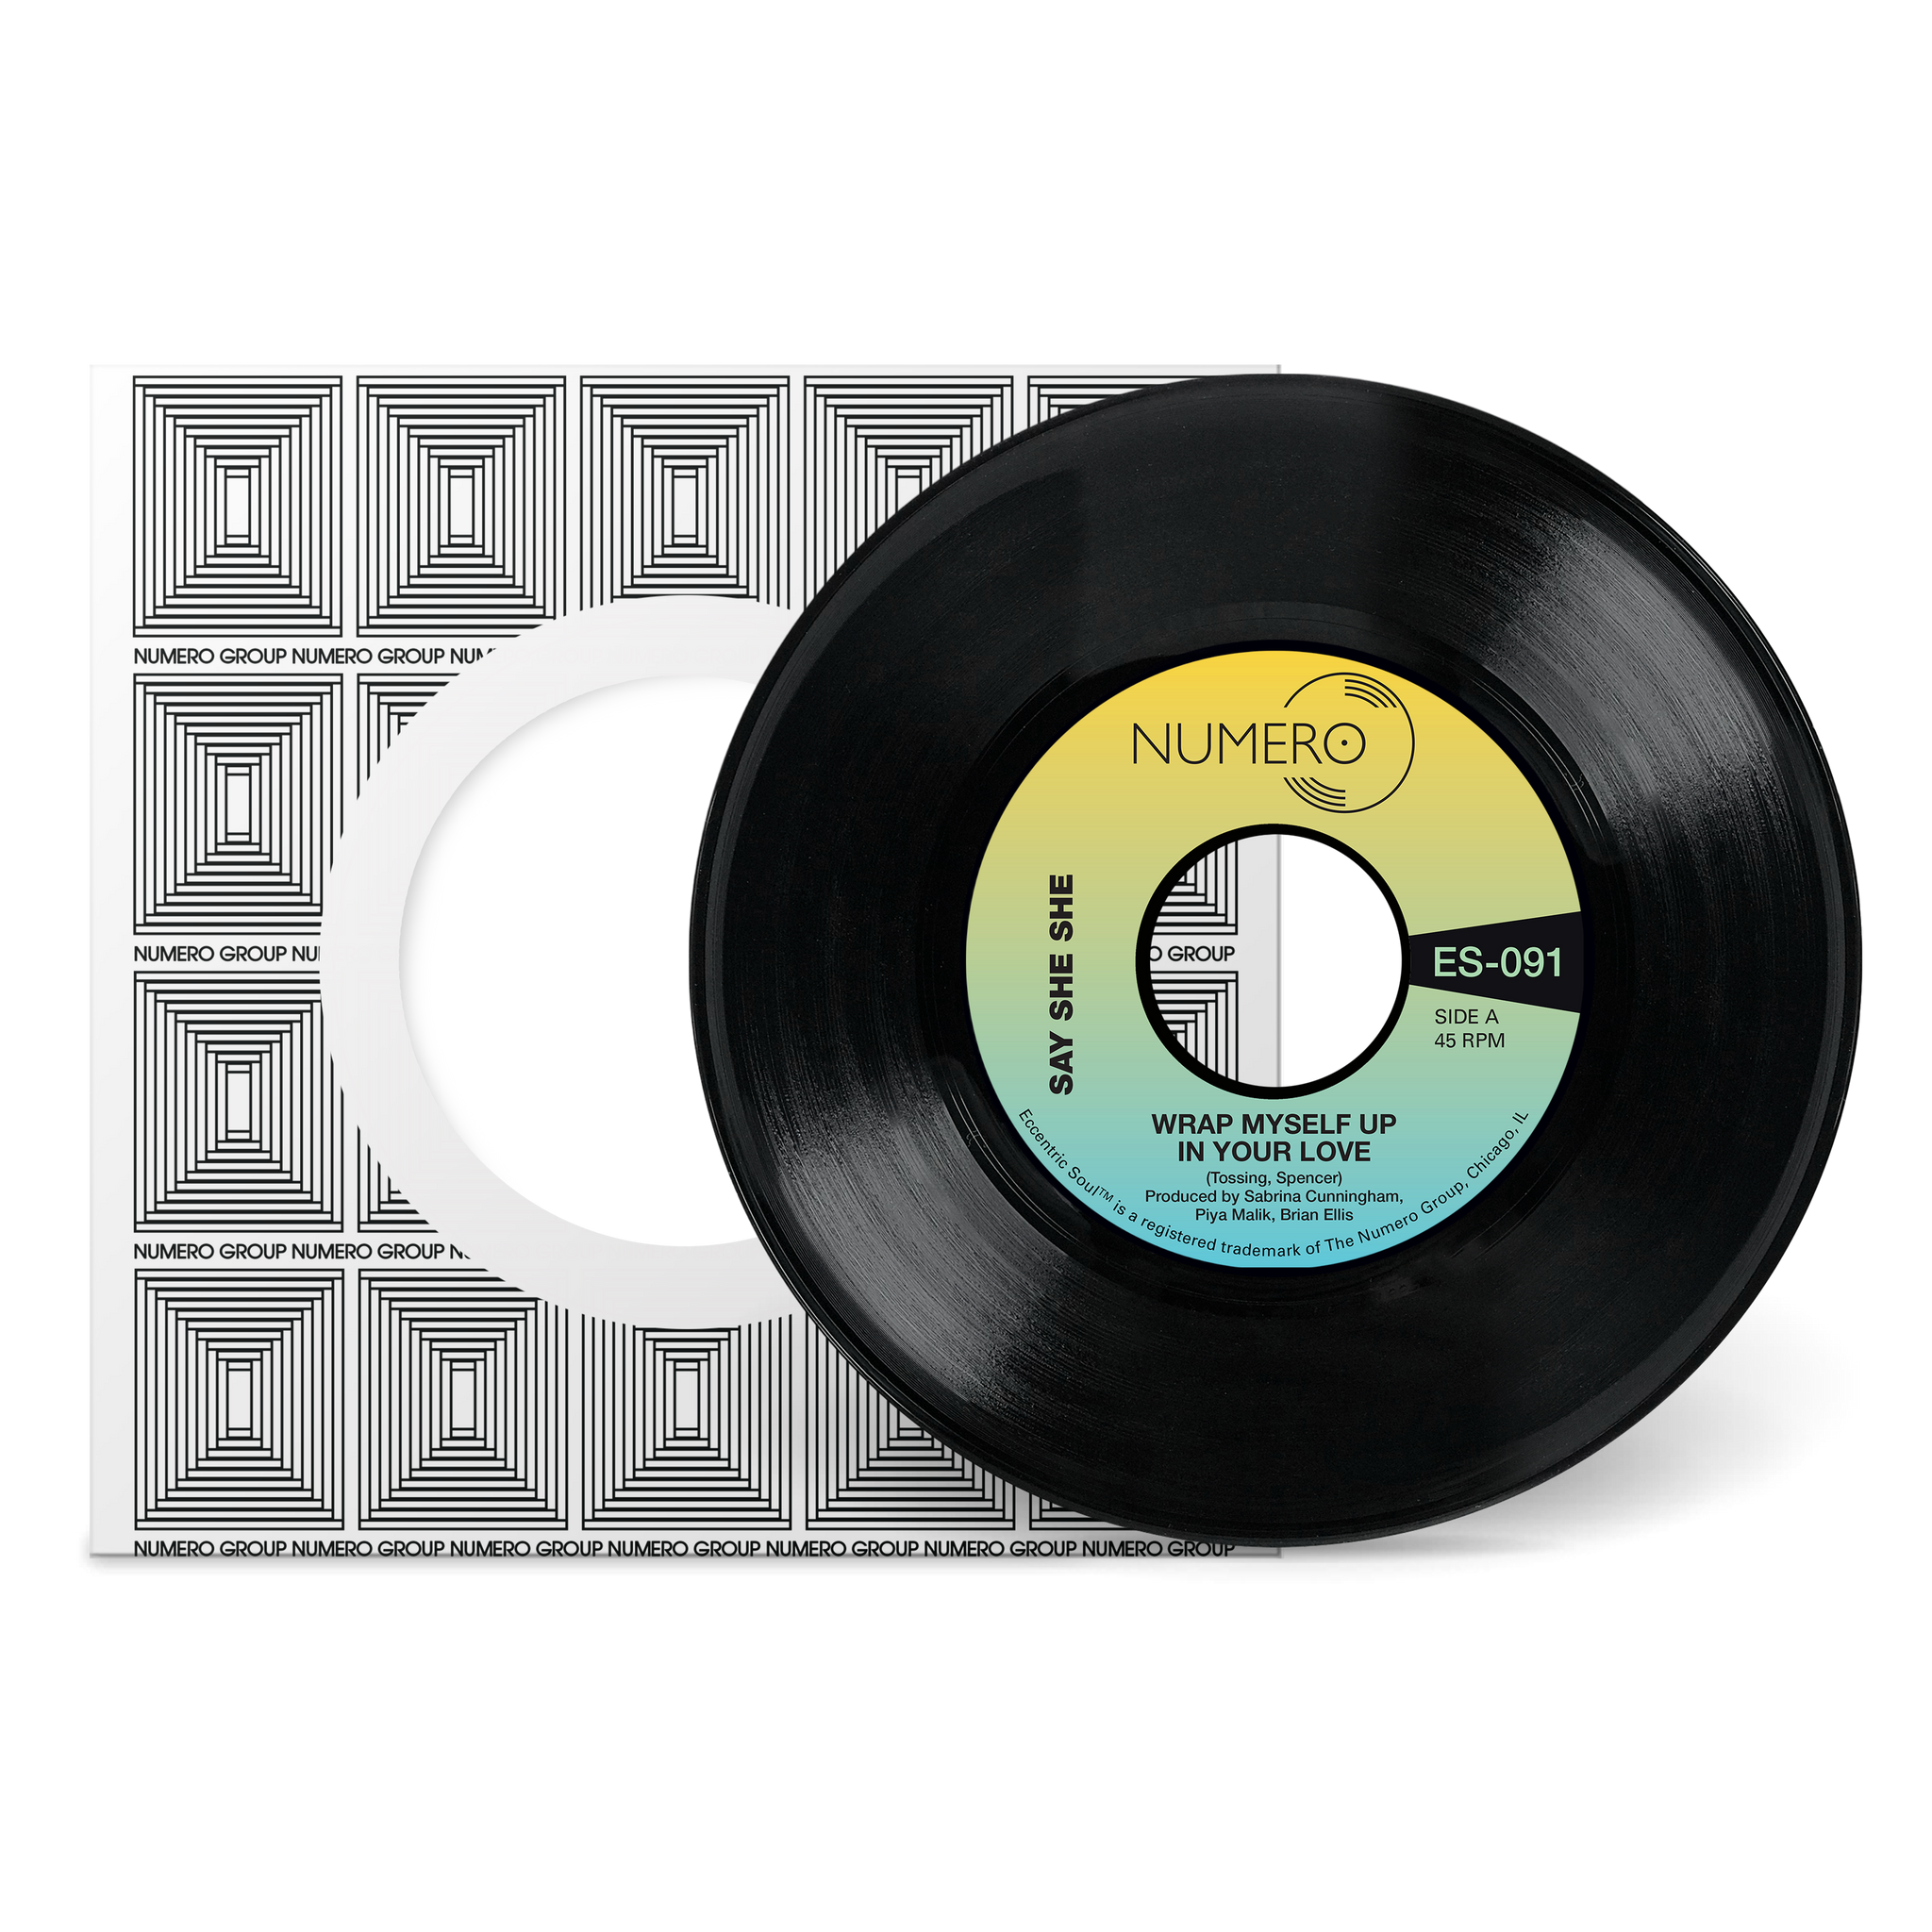 Say She She & Jim Spencer - Wrap Myself Up In Your Love - New 7" Single Record 2024 Numero Group Black Vinyl - Funk / Disco / AOR